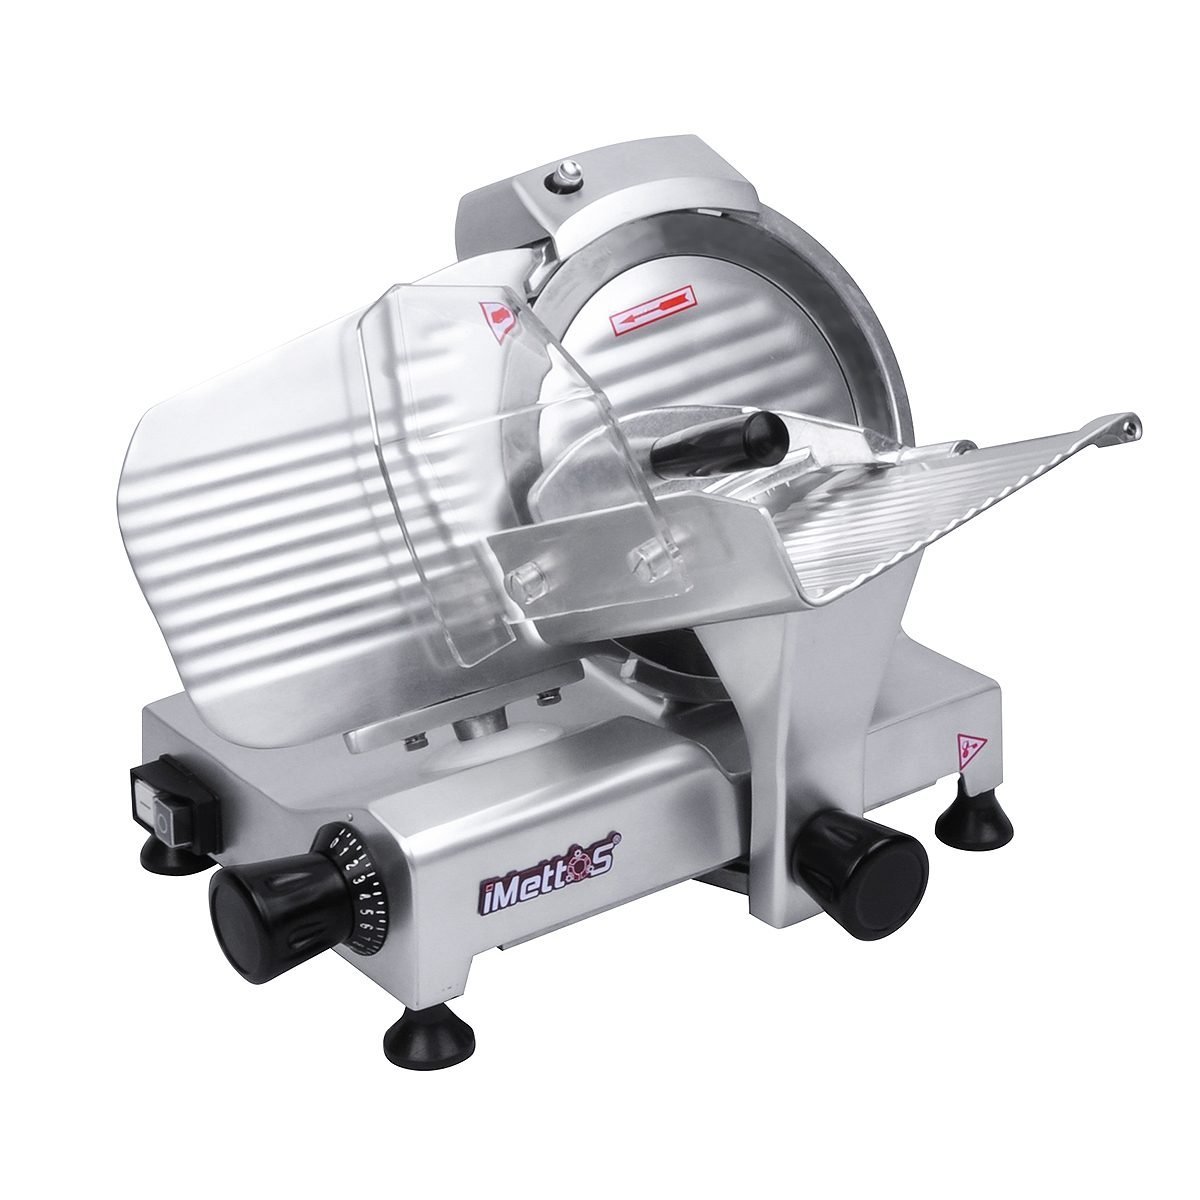 New Imettos 201004 220mm Meat Slicer For Sale